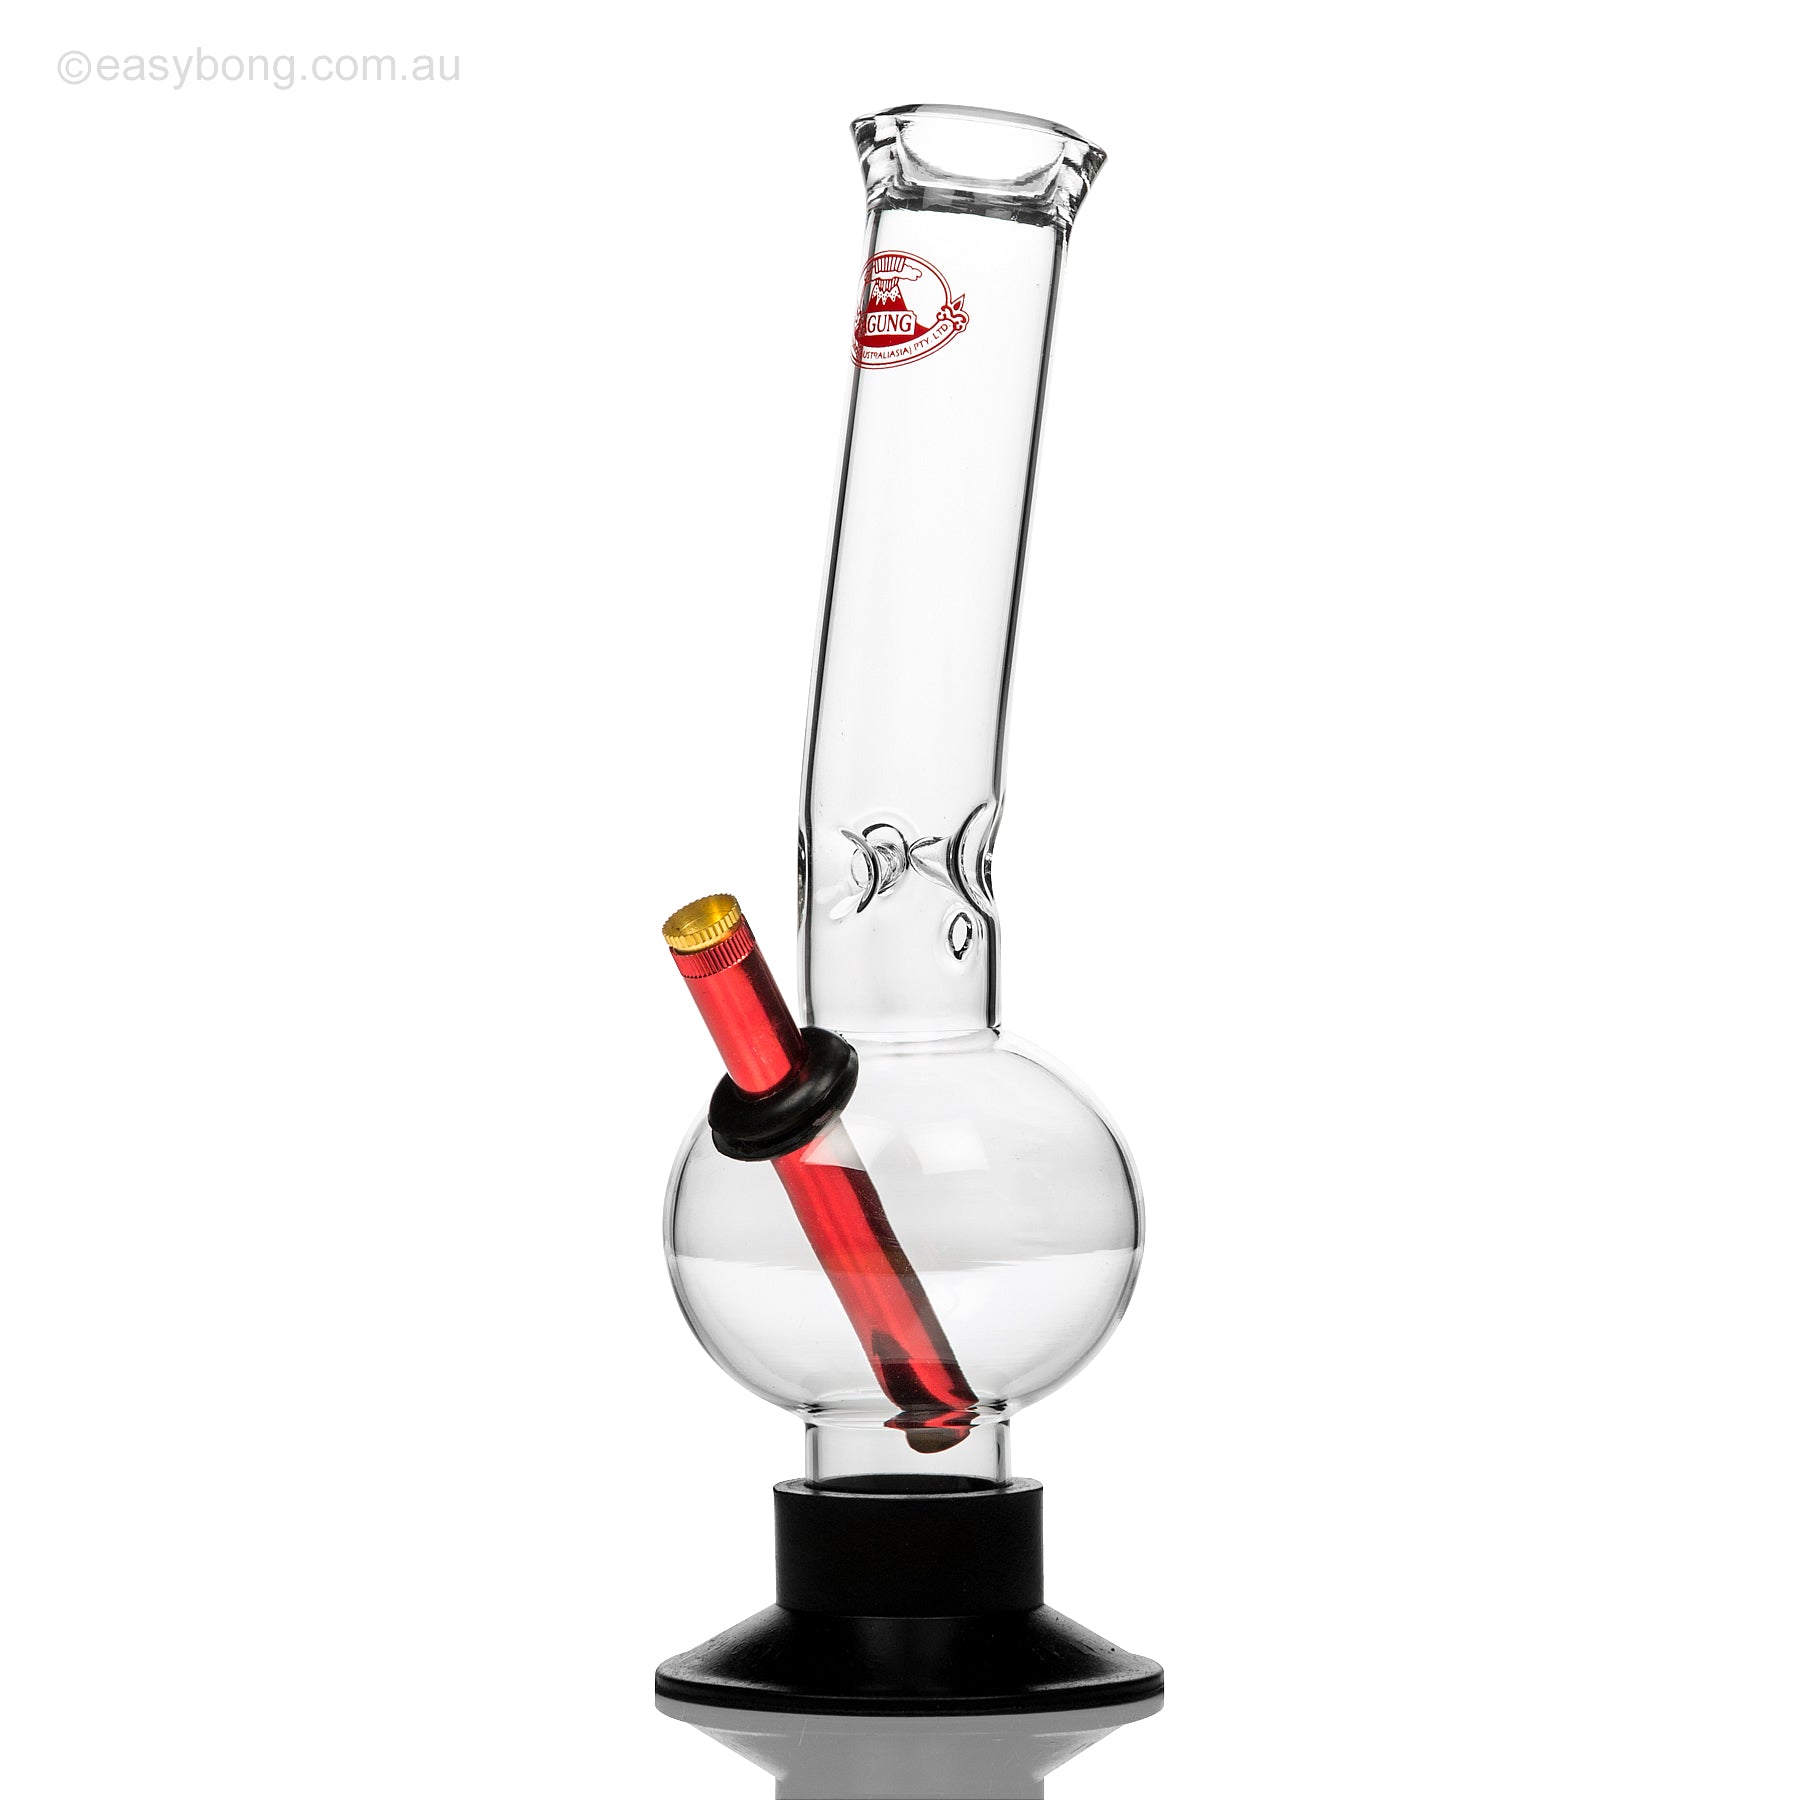 Large Agung glass bong with rubber base and made for Aussie cannabis smokers.